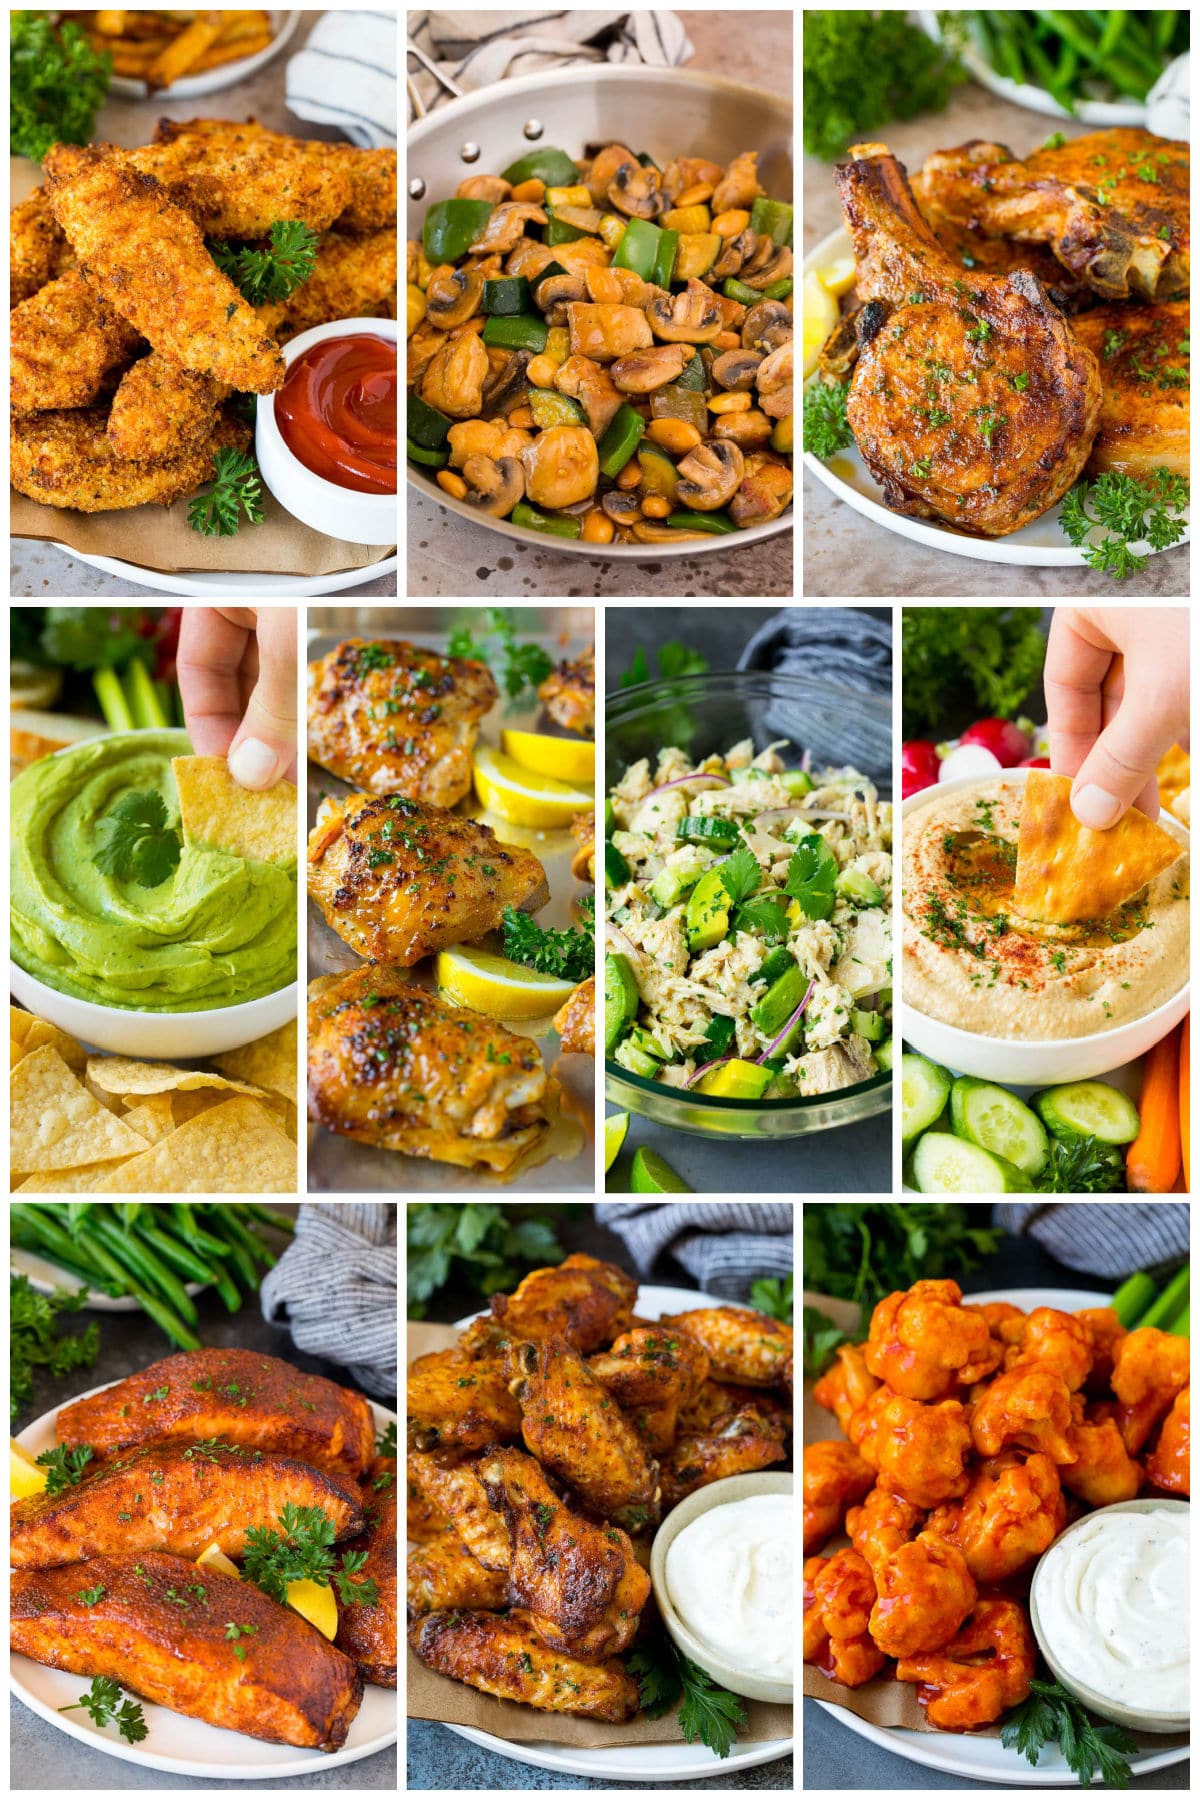 A collection of delicious healthy recipes like baba ganoush, avocado tuna salad and baked chicken thighs.